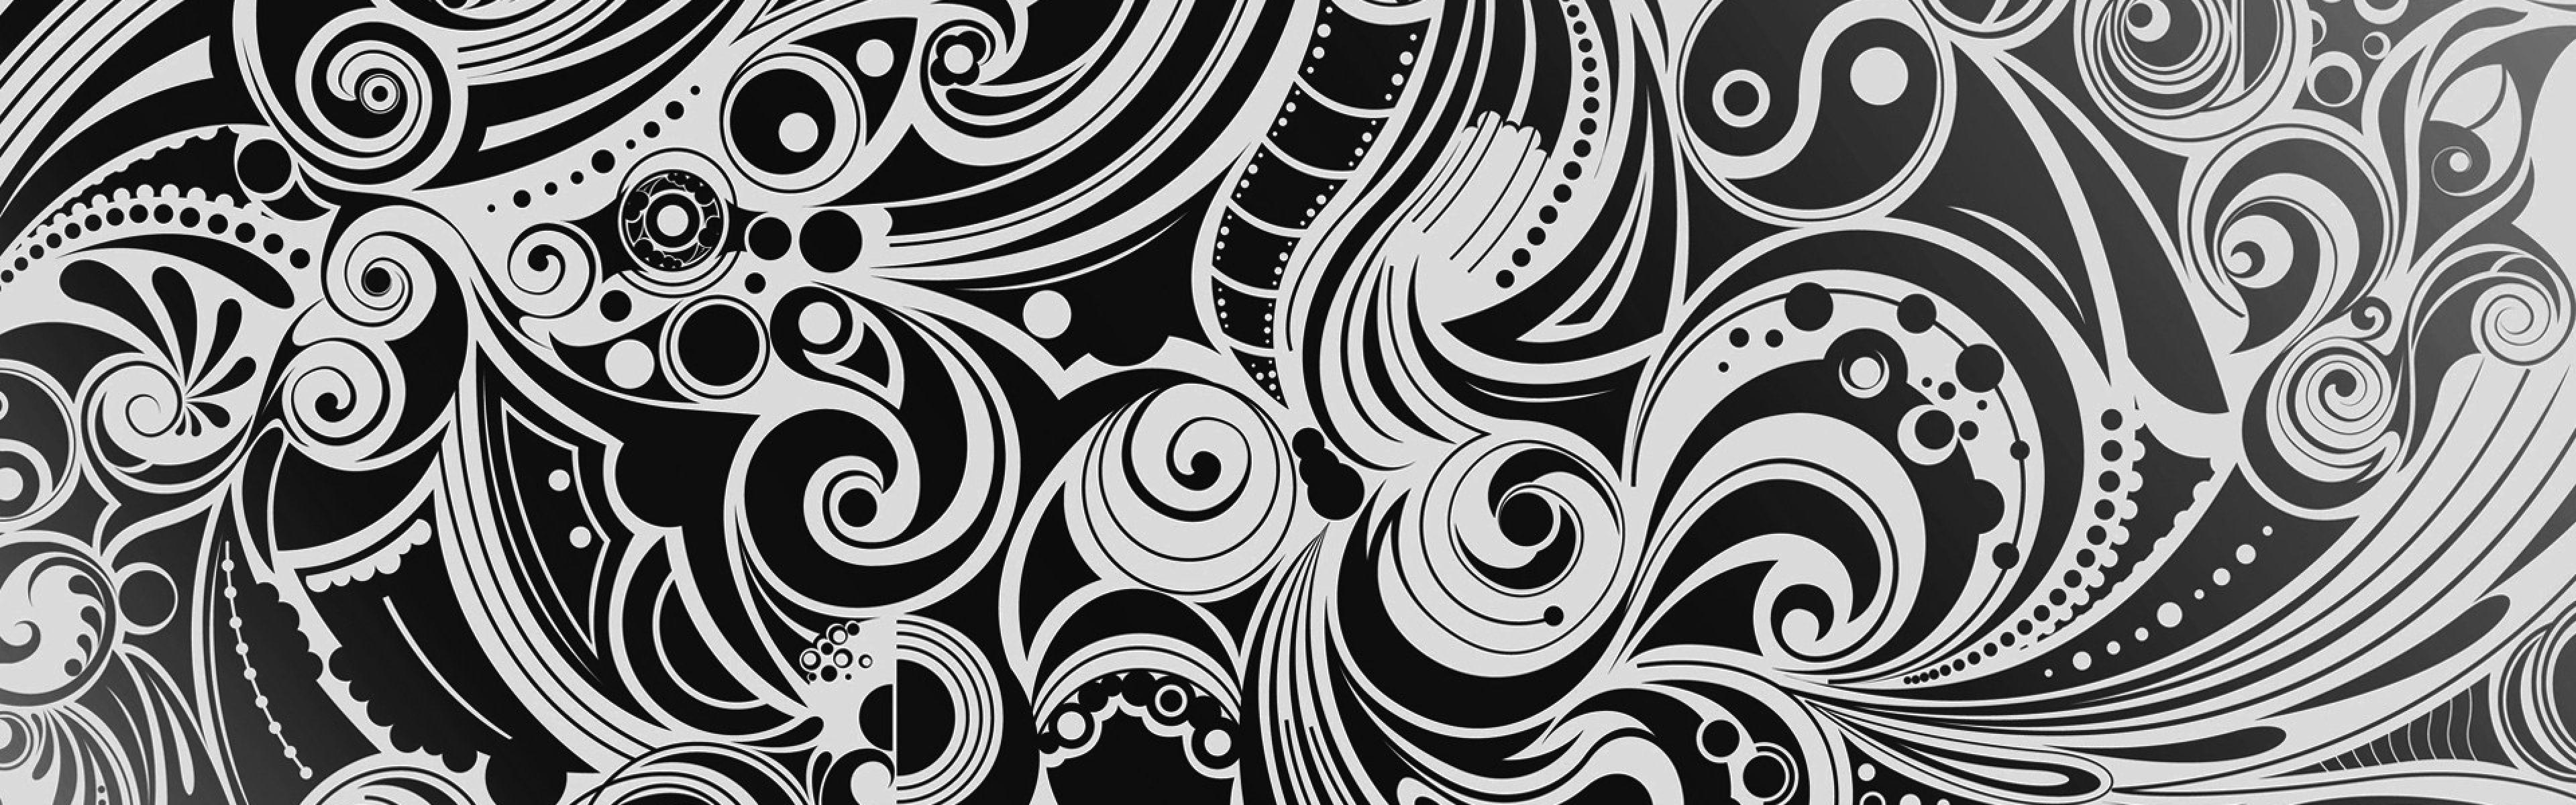 Black And White Design Wallpapers - Wallpaper Cave